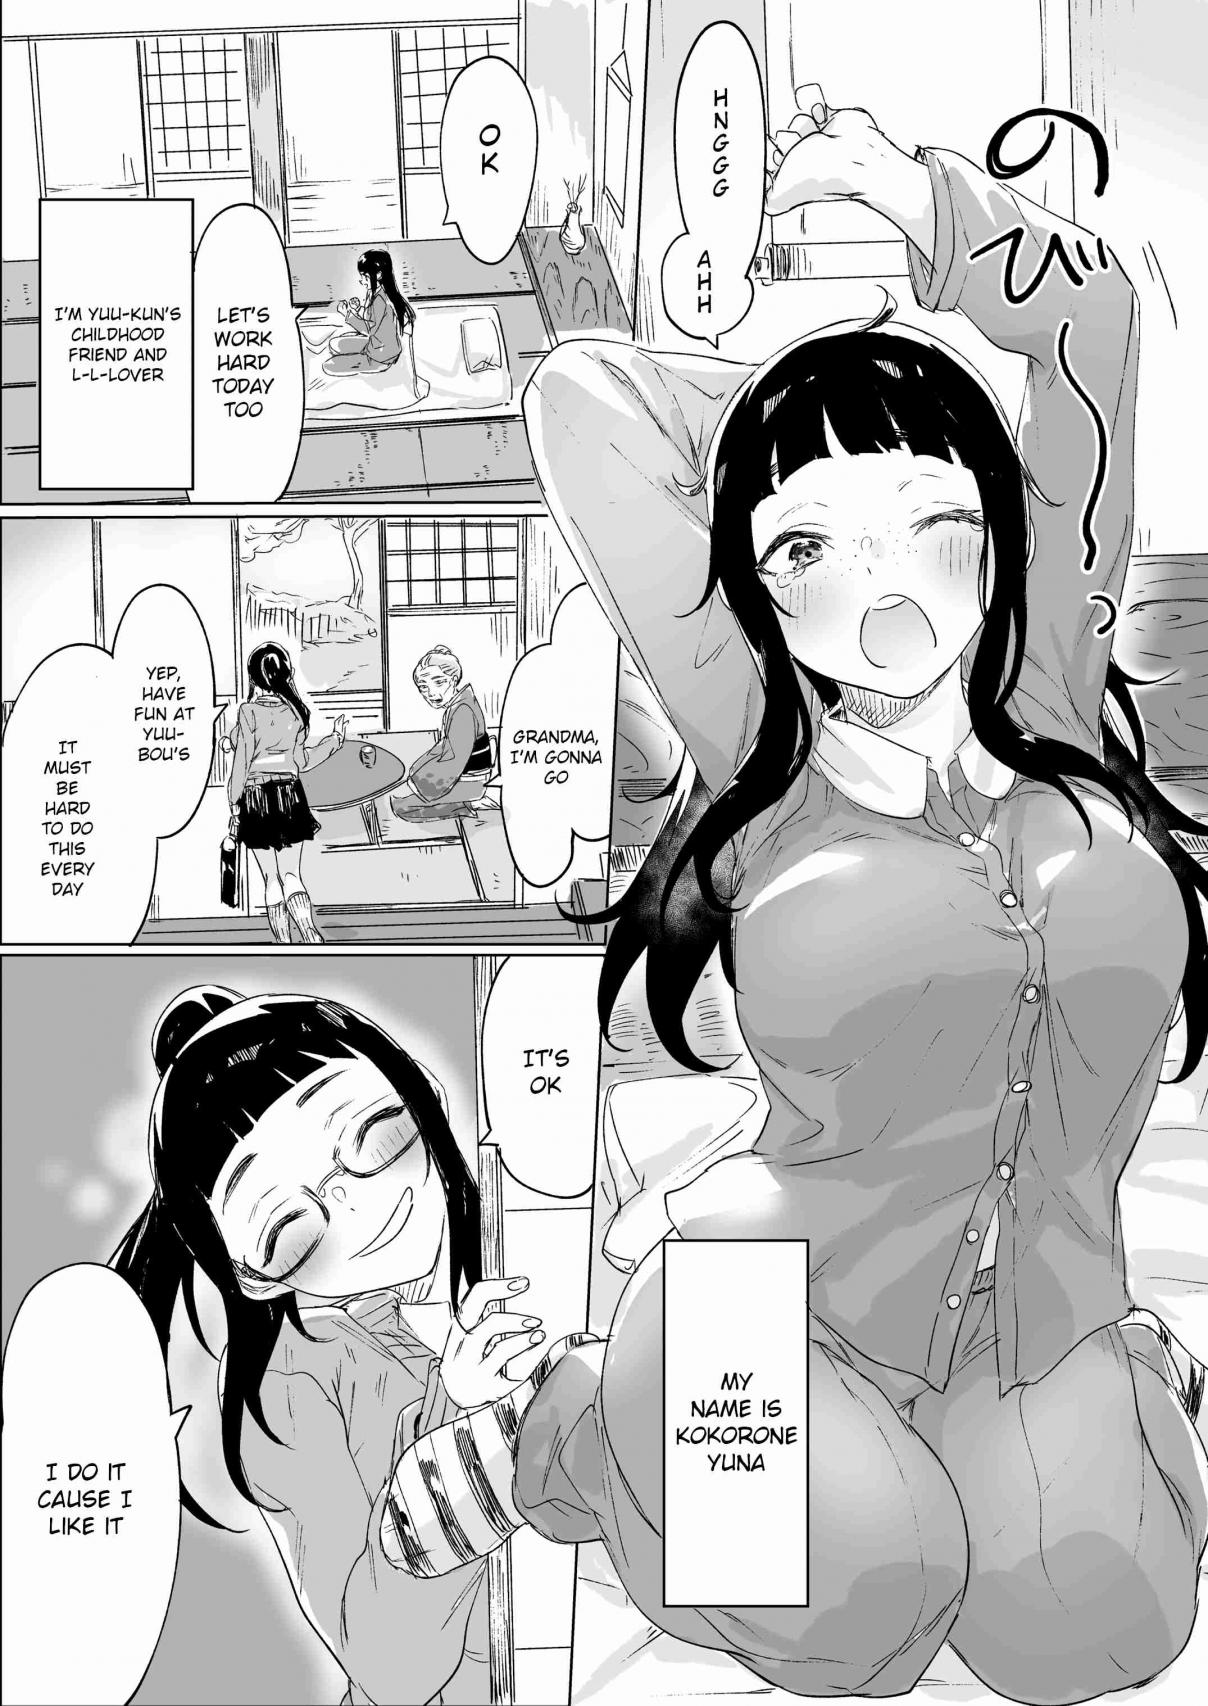 Confessing to my Childhood Friend who’s Worried she’s Plain Vol. 1 Ch. 1